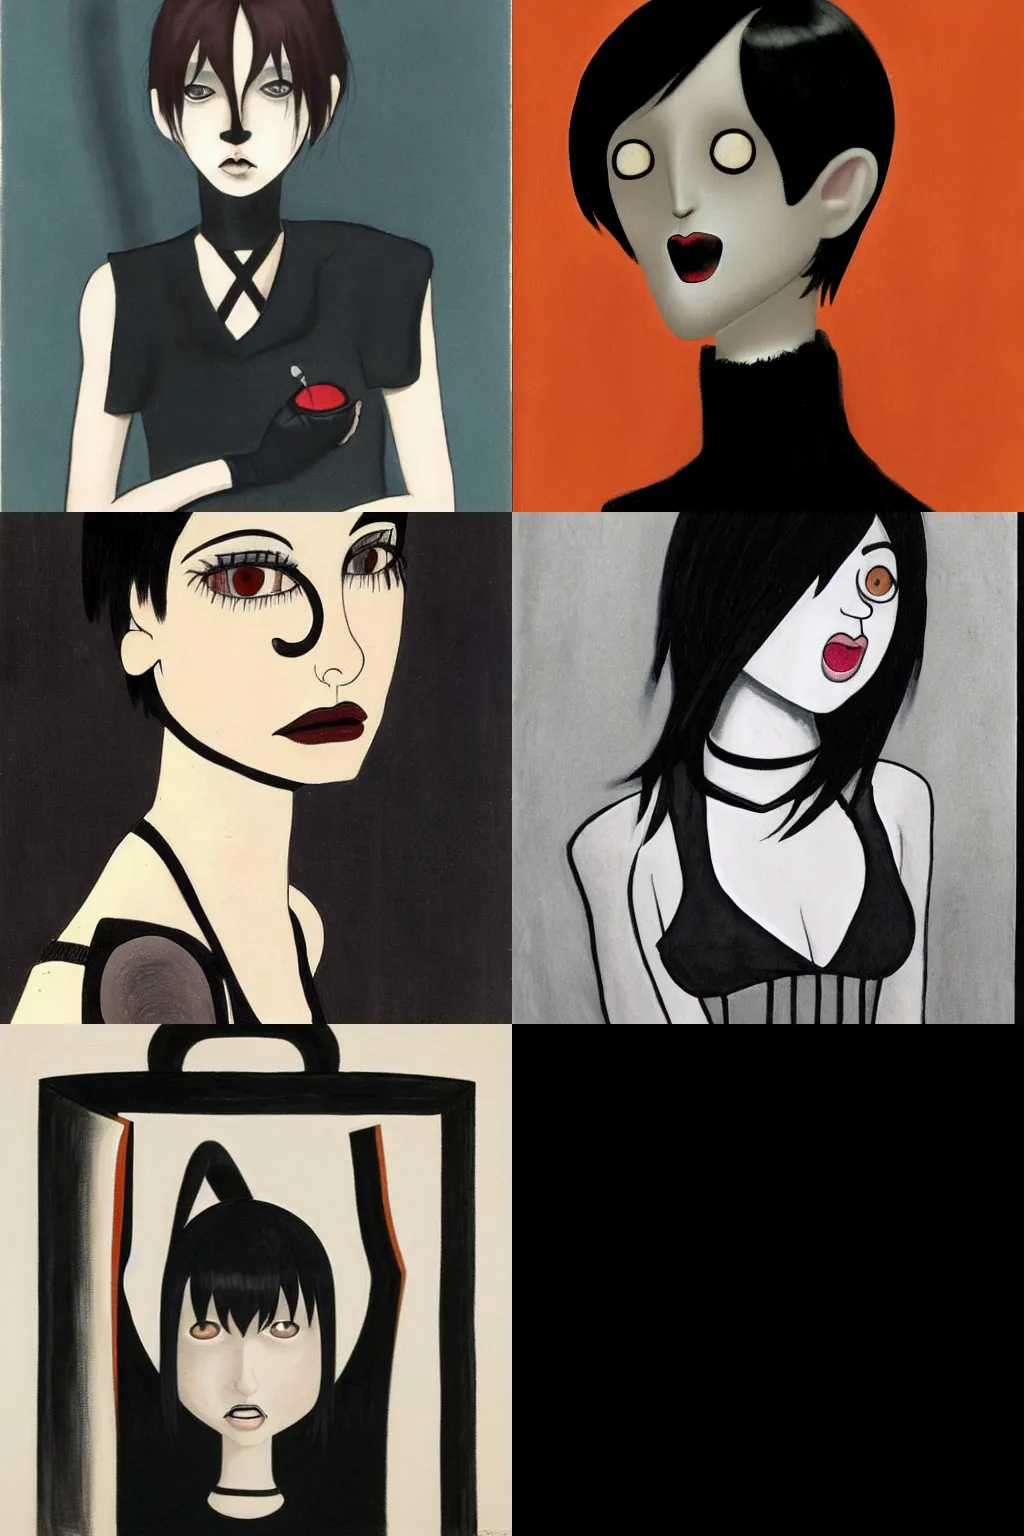 Prompt: an emo portrait by charles addams. her hair is dark brown and cut into a short, messy pixie cut. she has a slightly rounded face, with a pointed chin, large entirely - black eyes, and a small nose. she is wearing a black tank top, a black leather jacket, a black knee - length skirt, and a black choker..